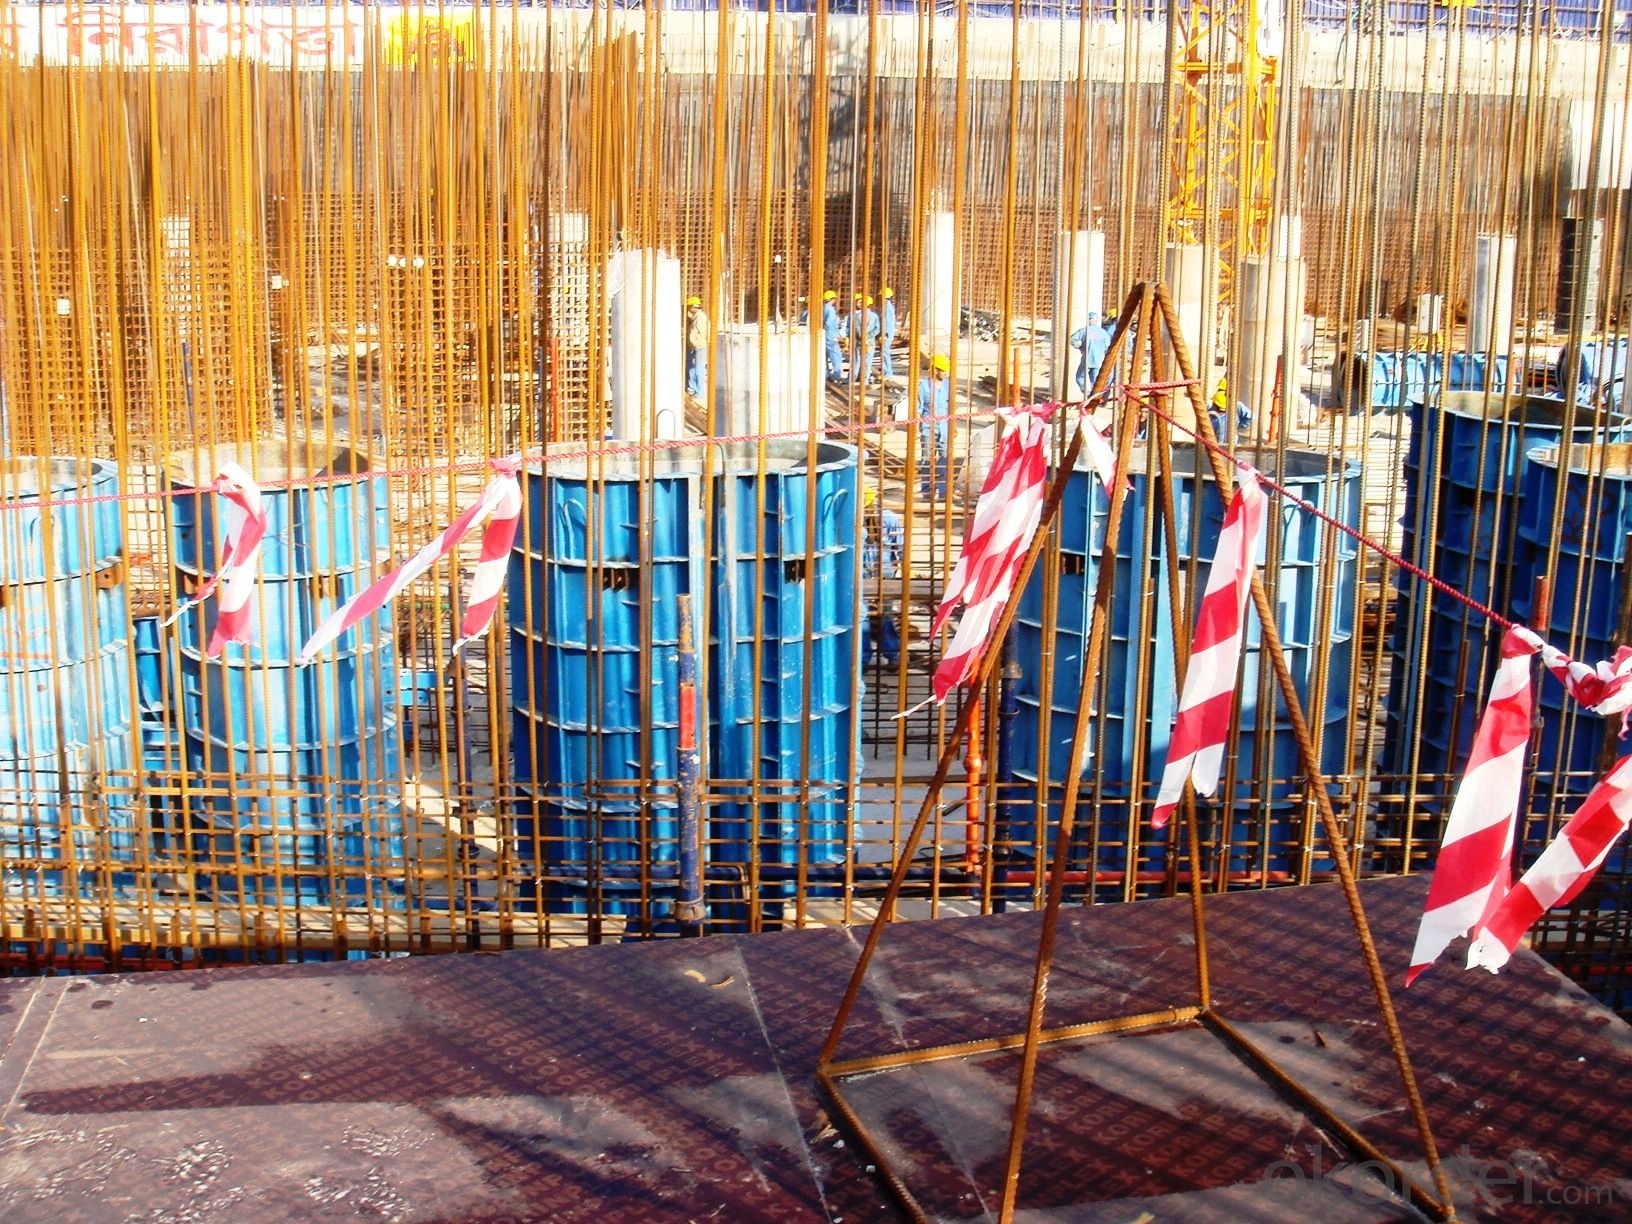 Steel Formwork with Brand of Q235 for Circular Concrete Column Formwork